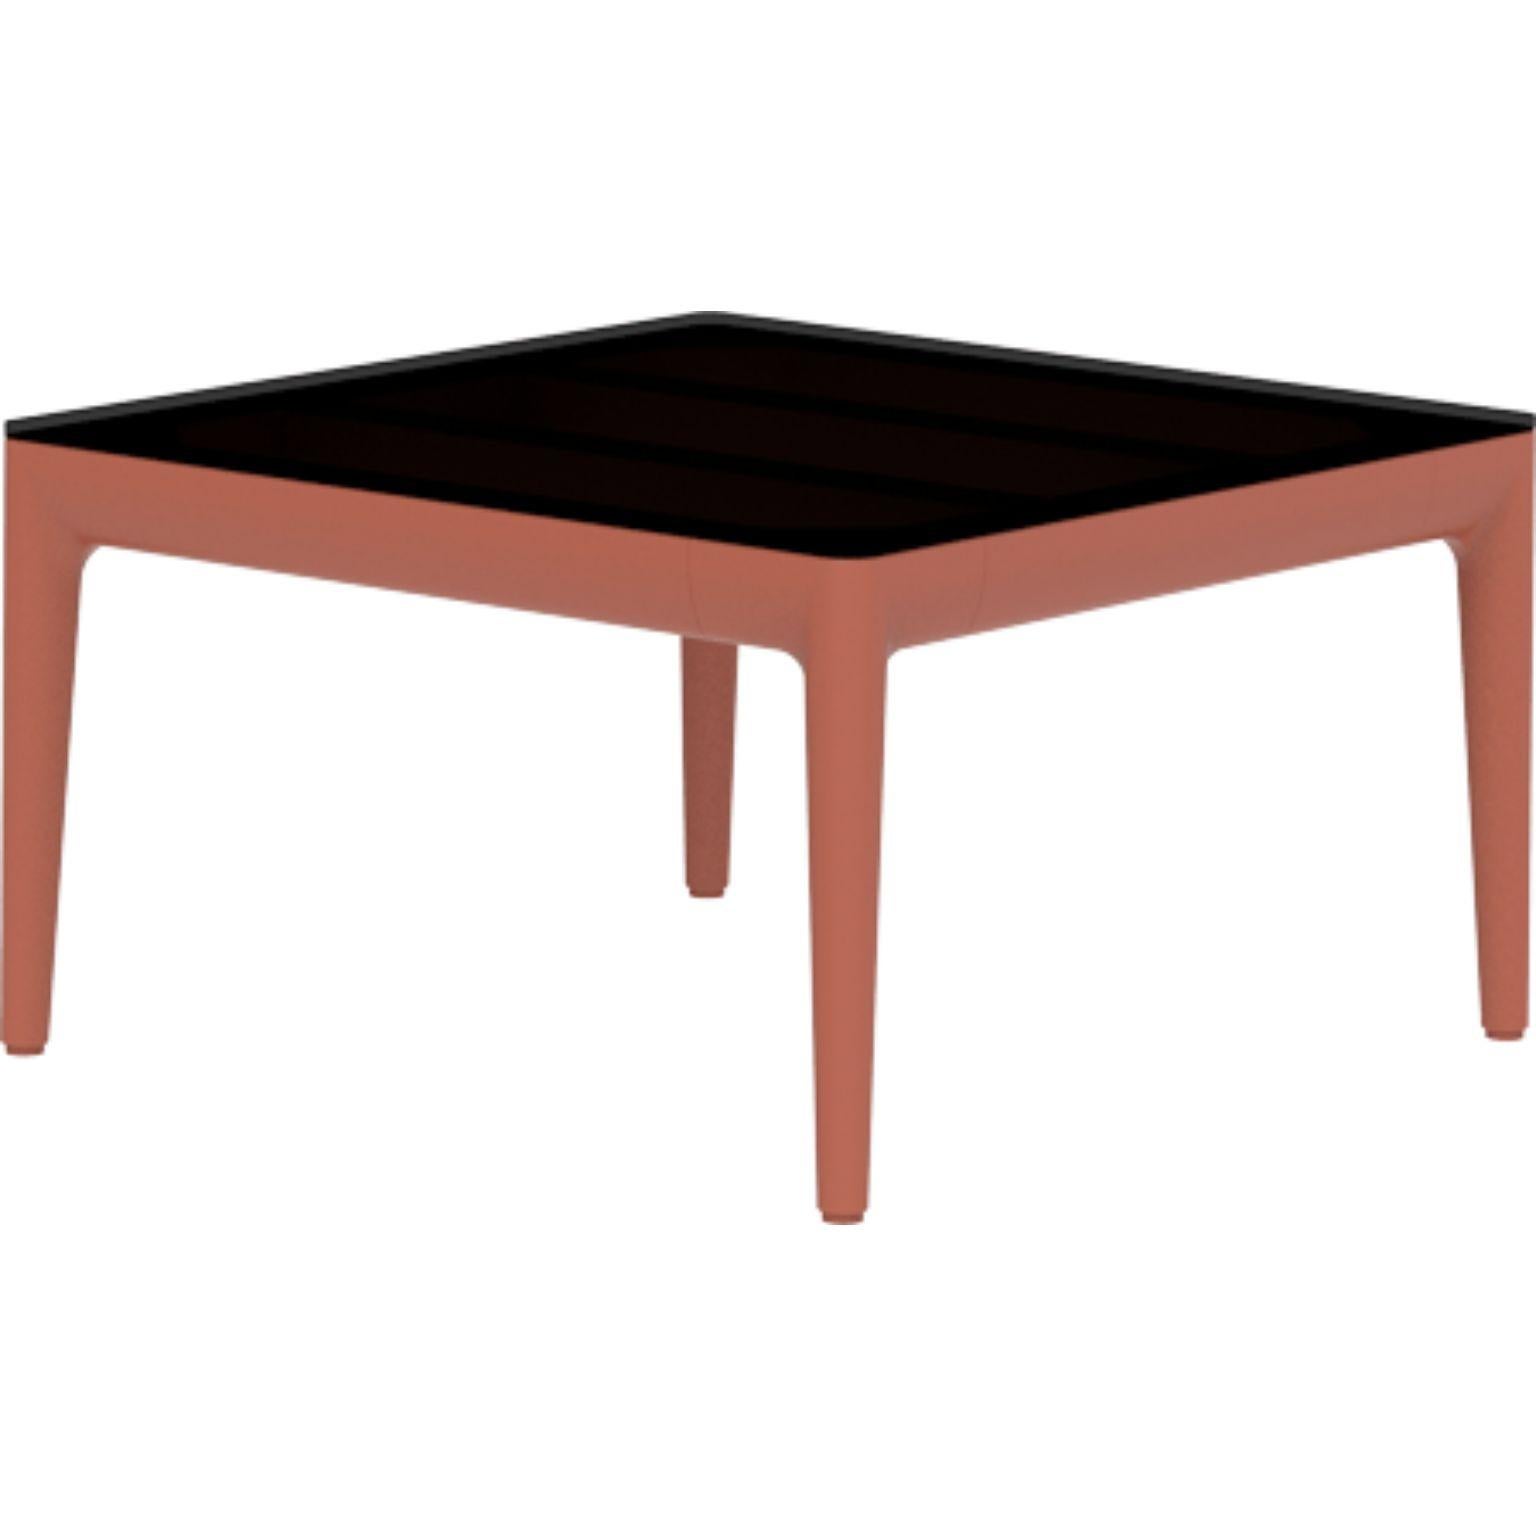 Ribbons Salmon Coffee Table 50 by MOWEE
Dimensions: D50 x W50 x H29 cm.
Material: Aluminum and HPL top.
Weight: 8 kg.
Also available in different colors and finishes. (HPL Black Edge or Neolith top).

An unmistakable collection for its beauty and